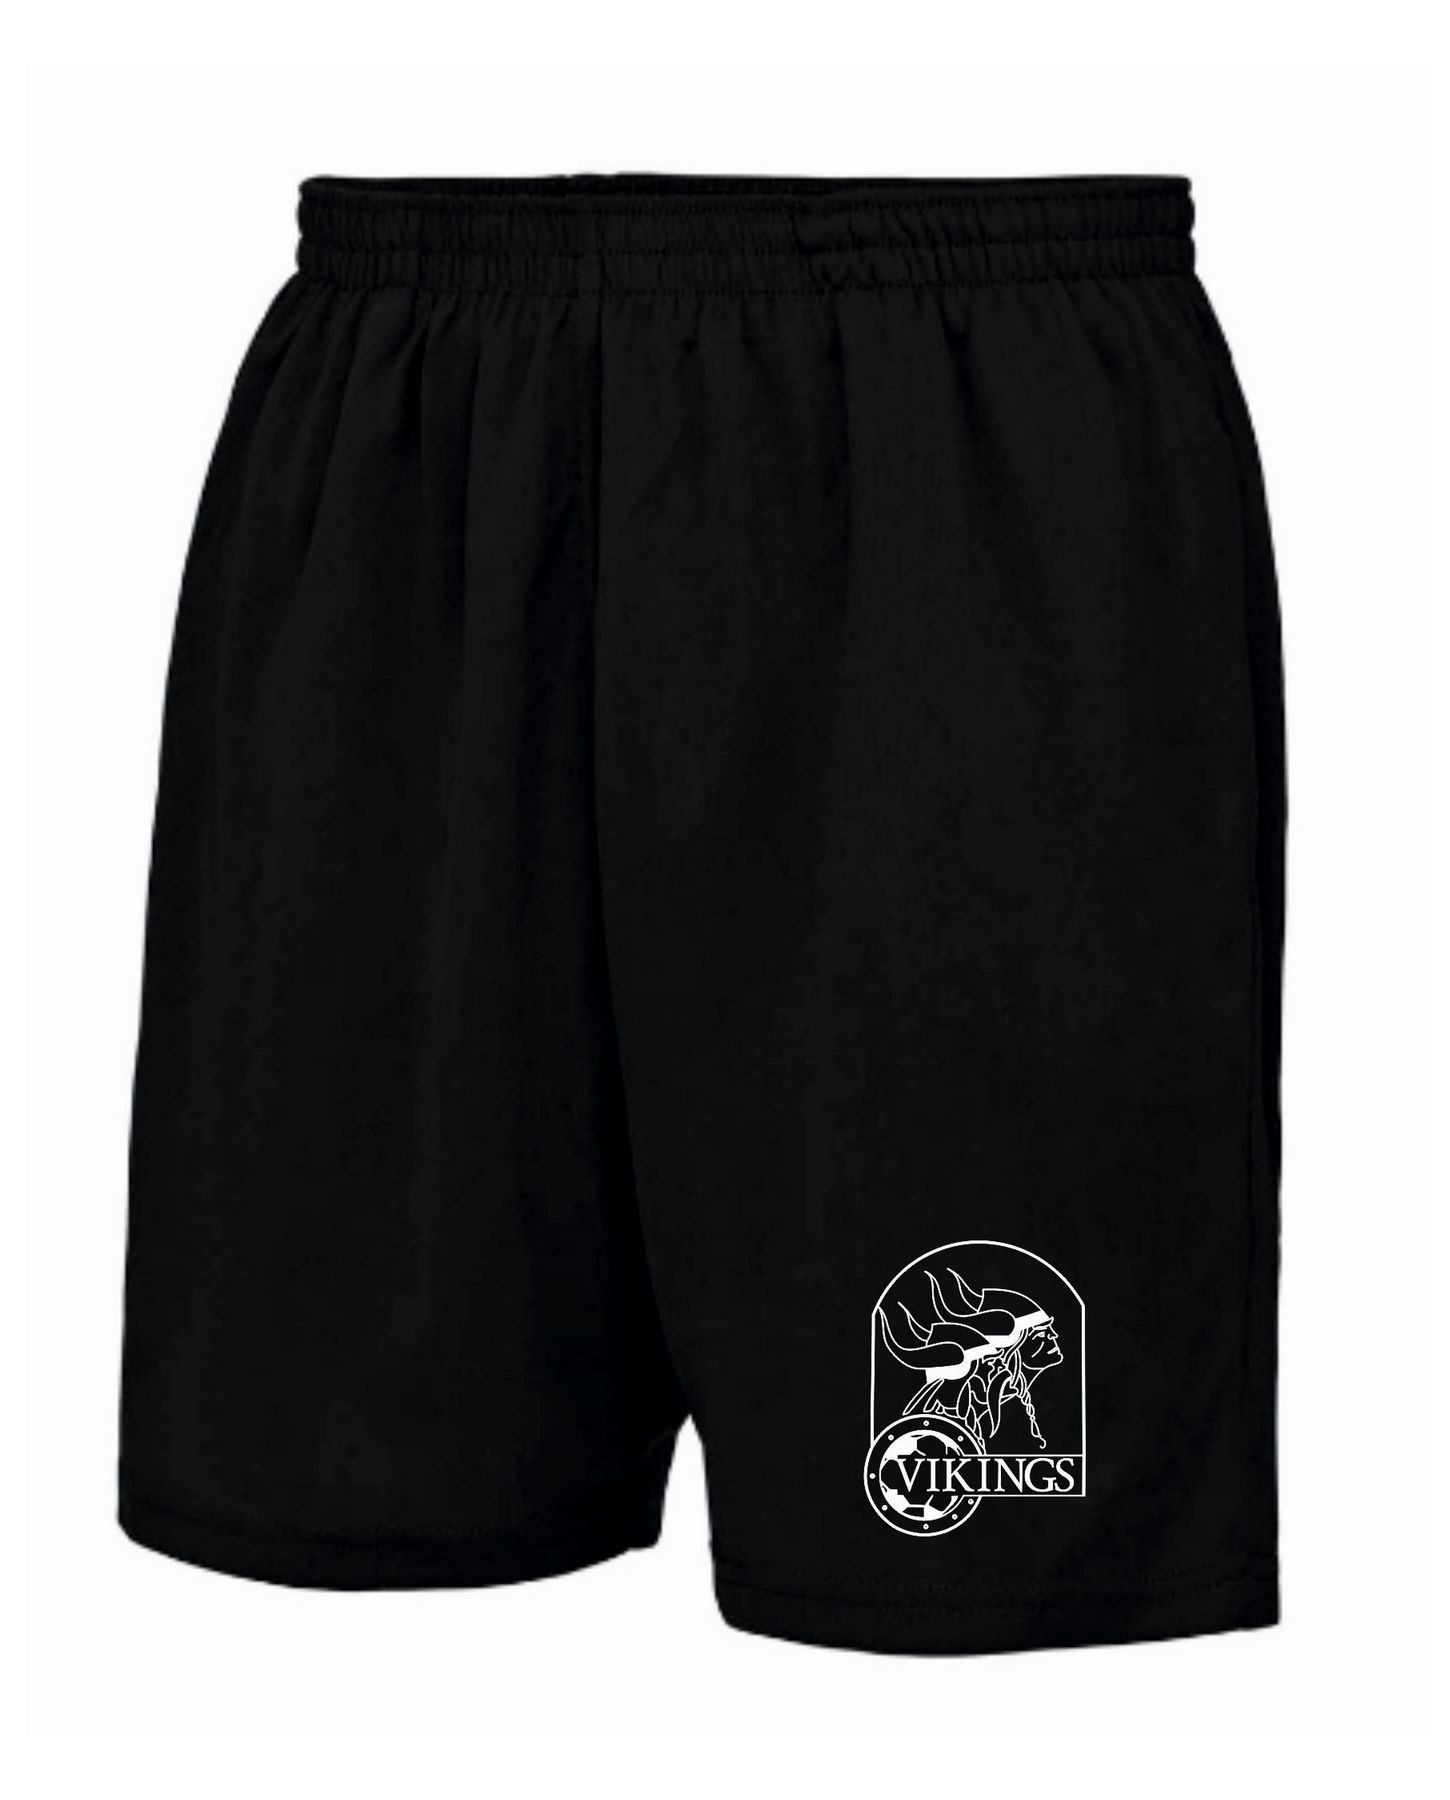 Vikings match and training shorts - Sigma Embroidery & Printing